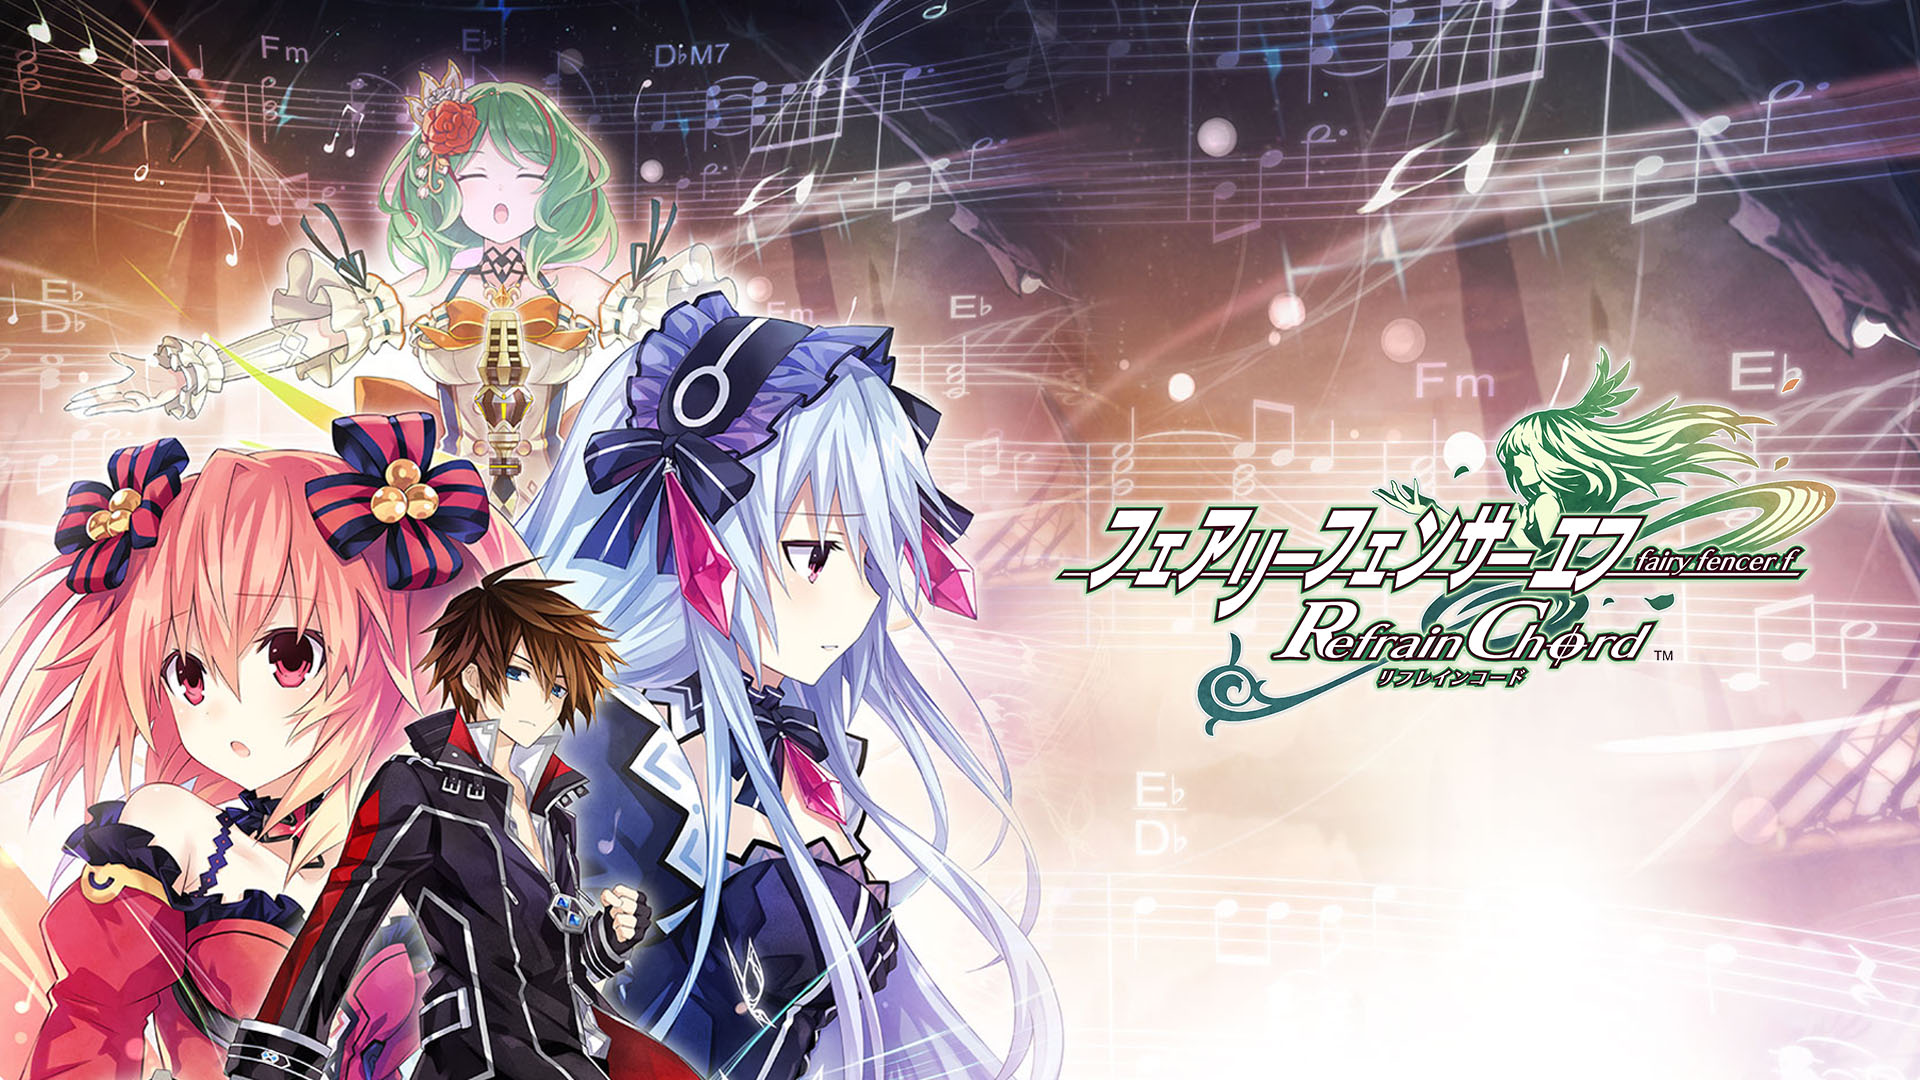 Fairy Fencer F: Refrain Chord debut trailer and details